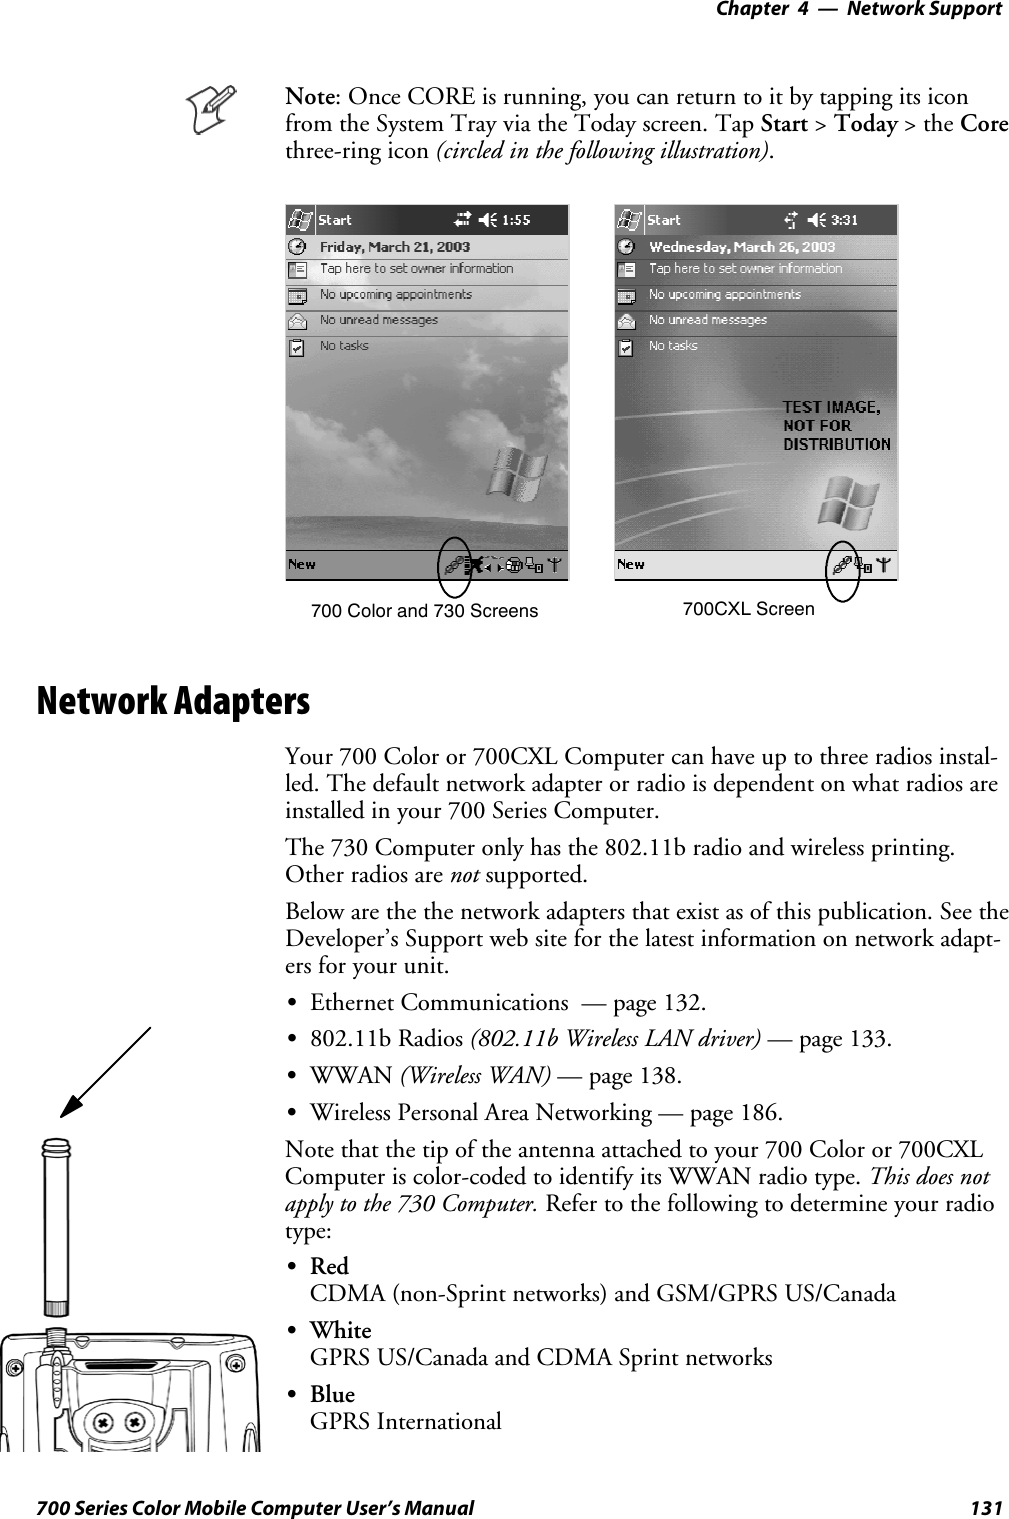 Network Support—Chapter 4131700 Series Color Mobile Computer User’s ManualNote: Once CORE is running, you can return to it by tapping its iconfrom the System Tray via the Today screen. Tap Start &gt;Today &gt;theCorethree-ring icon (circled in the following illustration).700 Color and 730 Screens 700CXL ScreenNetwork AdaptersYour 700 Color or 700CXL Computer can have up to three radios instal-led. The default network adapter or radio is dependent on what radios areinstalled in your 700 Series Computer.The 730 Computer only has the 802.11b radio and wireless printing.Other radios are not supported.Below are the the network adapters that exist as of this publication. See theDeveloper’s Support web site for the latest information on network adapt-ers for your unit.SEthernet Communications — page 132.S802.11b Radios (802.11b Wireless LAN driver) — page 133.SWWAN (Wireless WAN) — page 138.SWireless Personal Area Networking — page 186.Note that the tip of the antenna attached to your 700 Color or 700CXLComputer is color-coded to identify its WWAN radio type. This does notapply to the 730 Computer. Refer to the following to determine your radiotype:SRedCDMA (non-Sprint networks) and GSM/GPRS US/CanadaSWhiteGPRS US/Canada and CDMA Sprint networksSBlueGPRS International